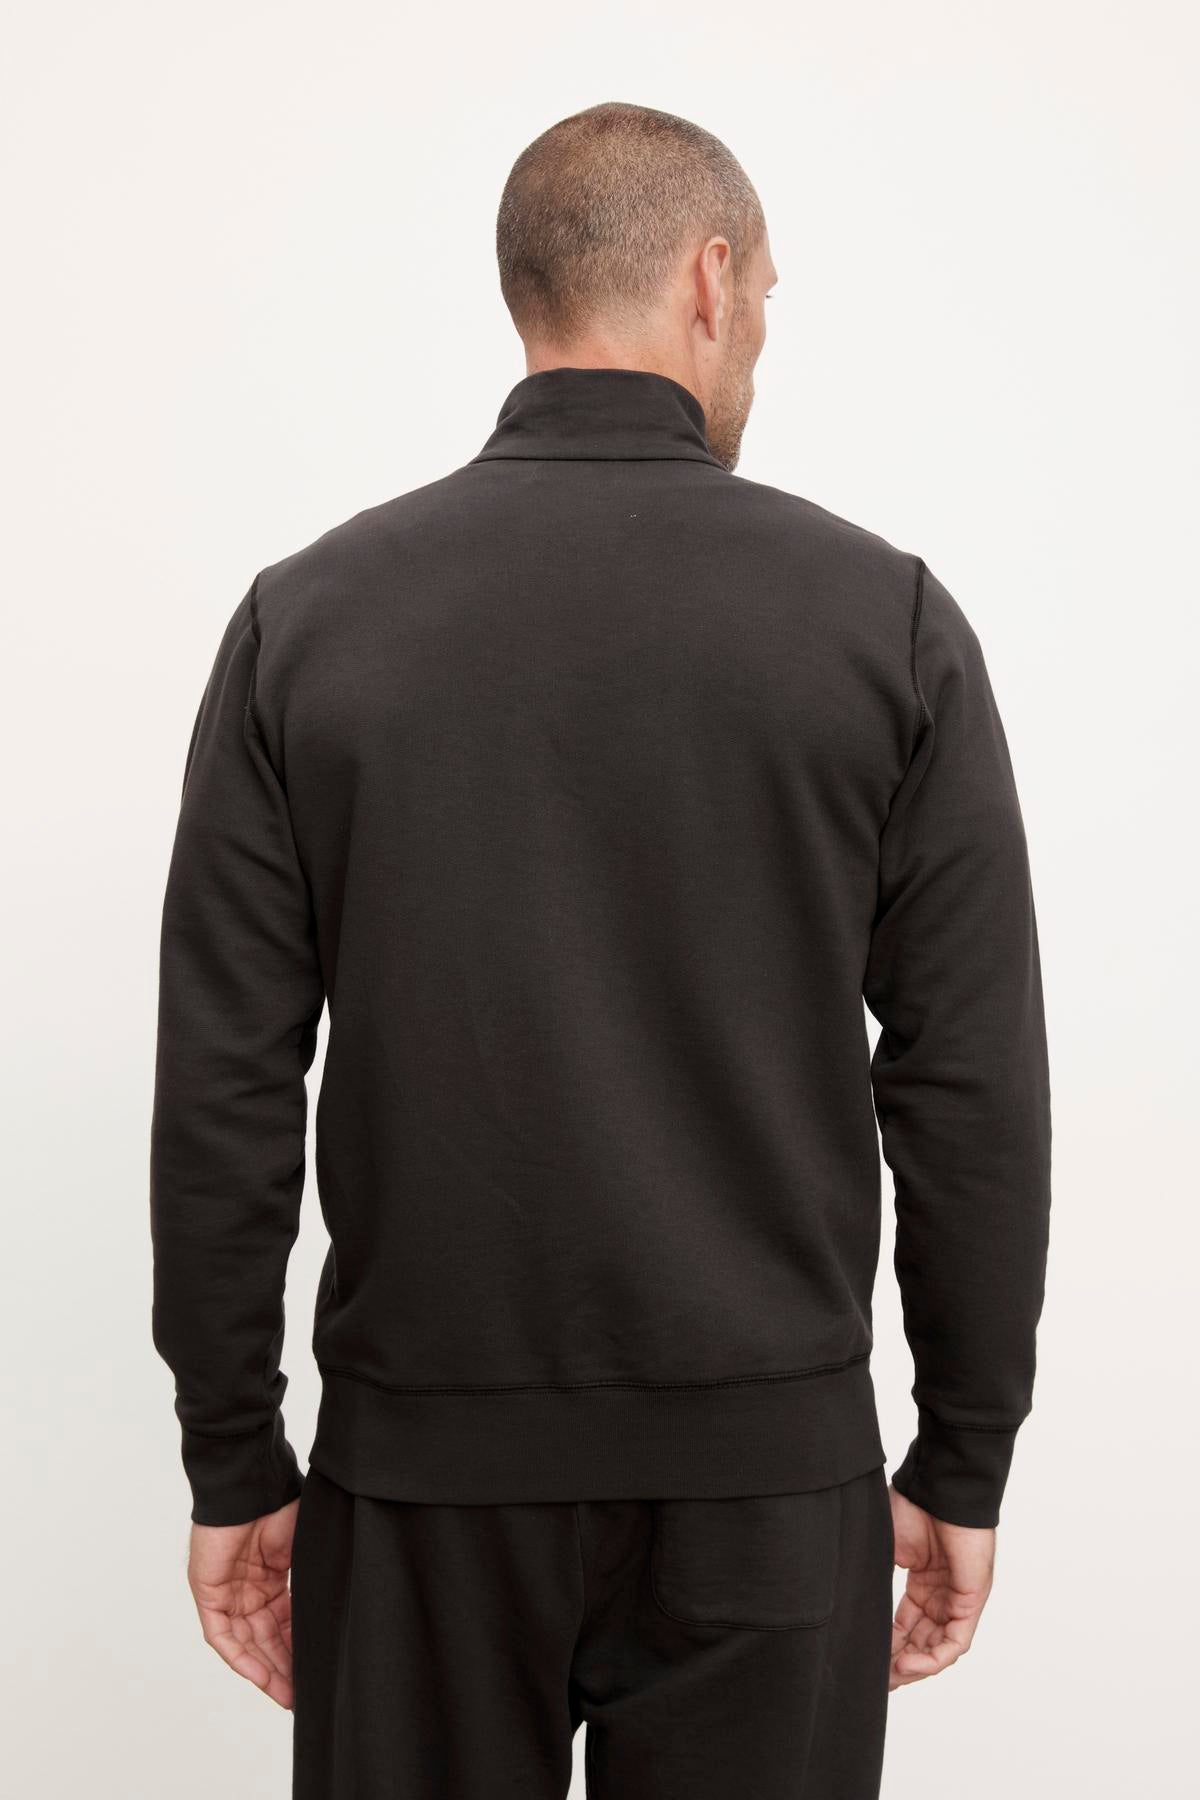 The back view of a man wearing a black Velvet by Graham & Spencer TERRY FRENCH TERRY FULL-ZIP sweatshirt from his casual wardrobe.-36008992899265